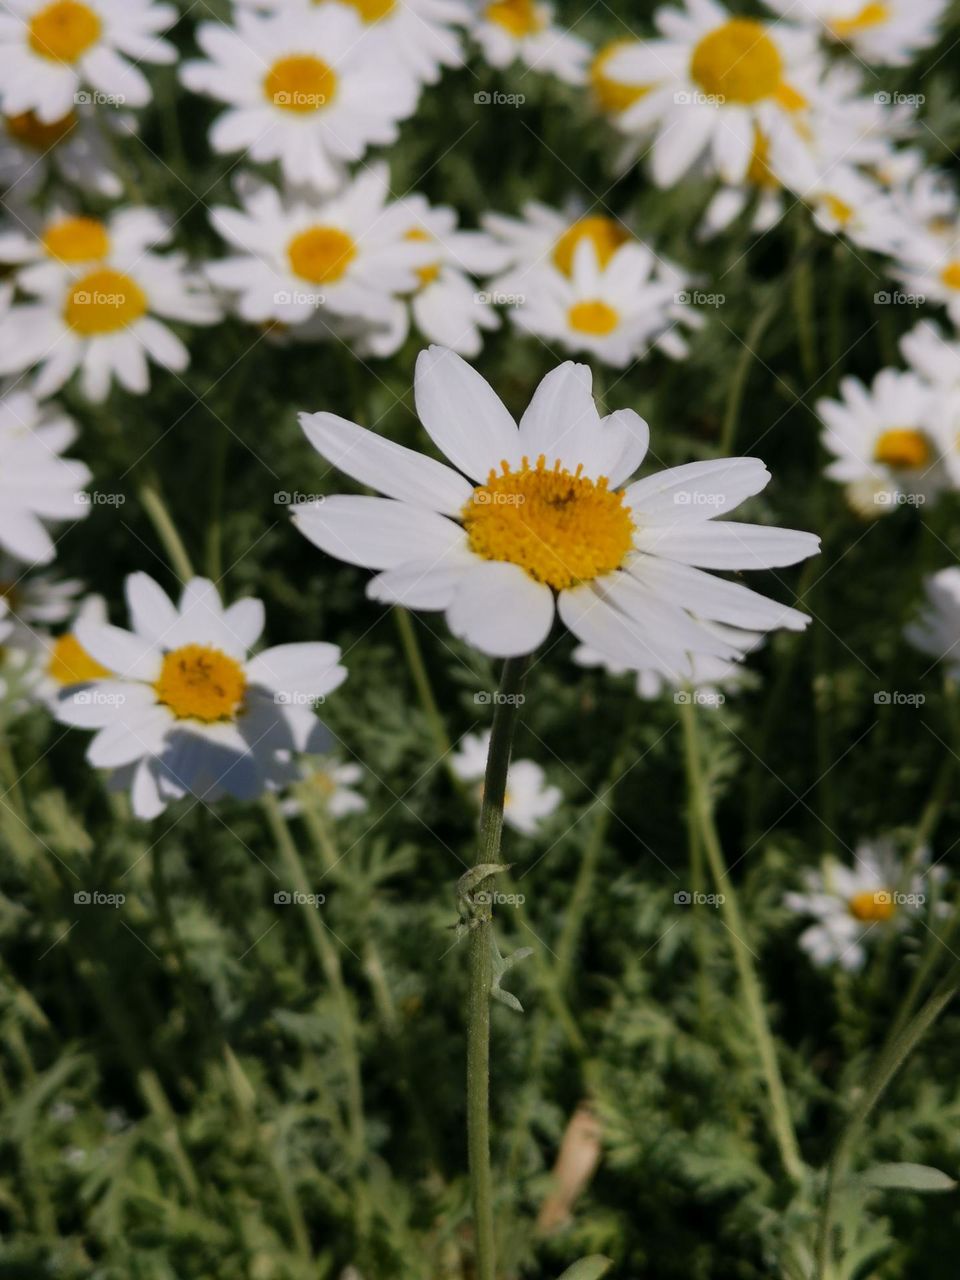 Field of flowering daisies.
Unusual shooting angle. Shooting from below. Down up. Blooming daisies. From the ground up...